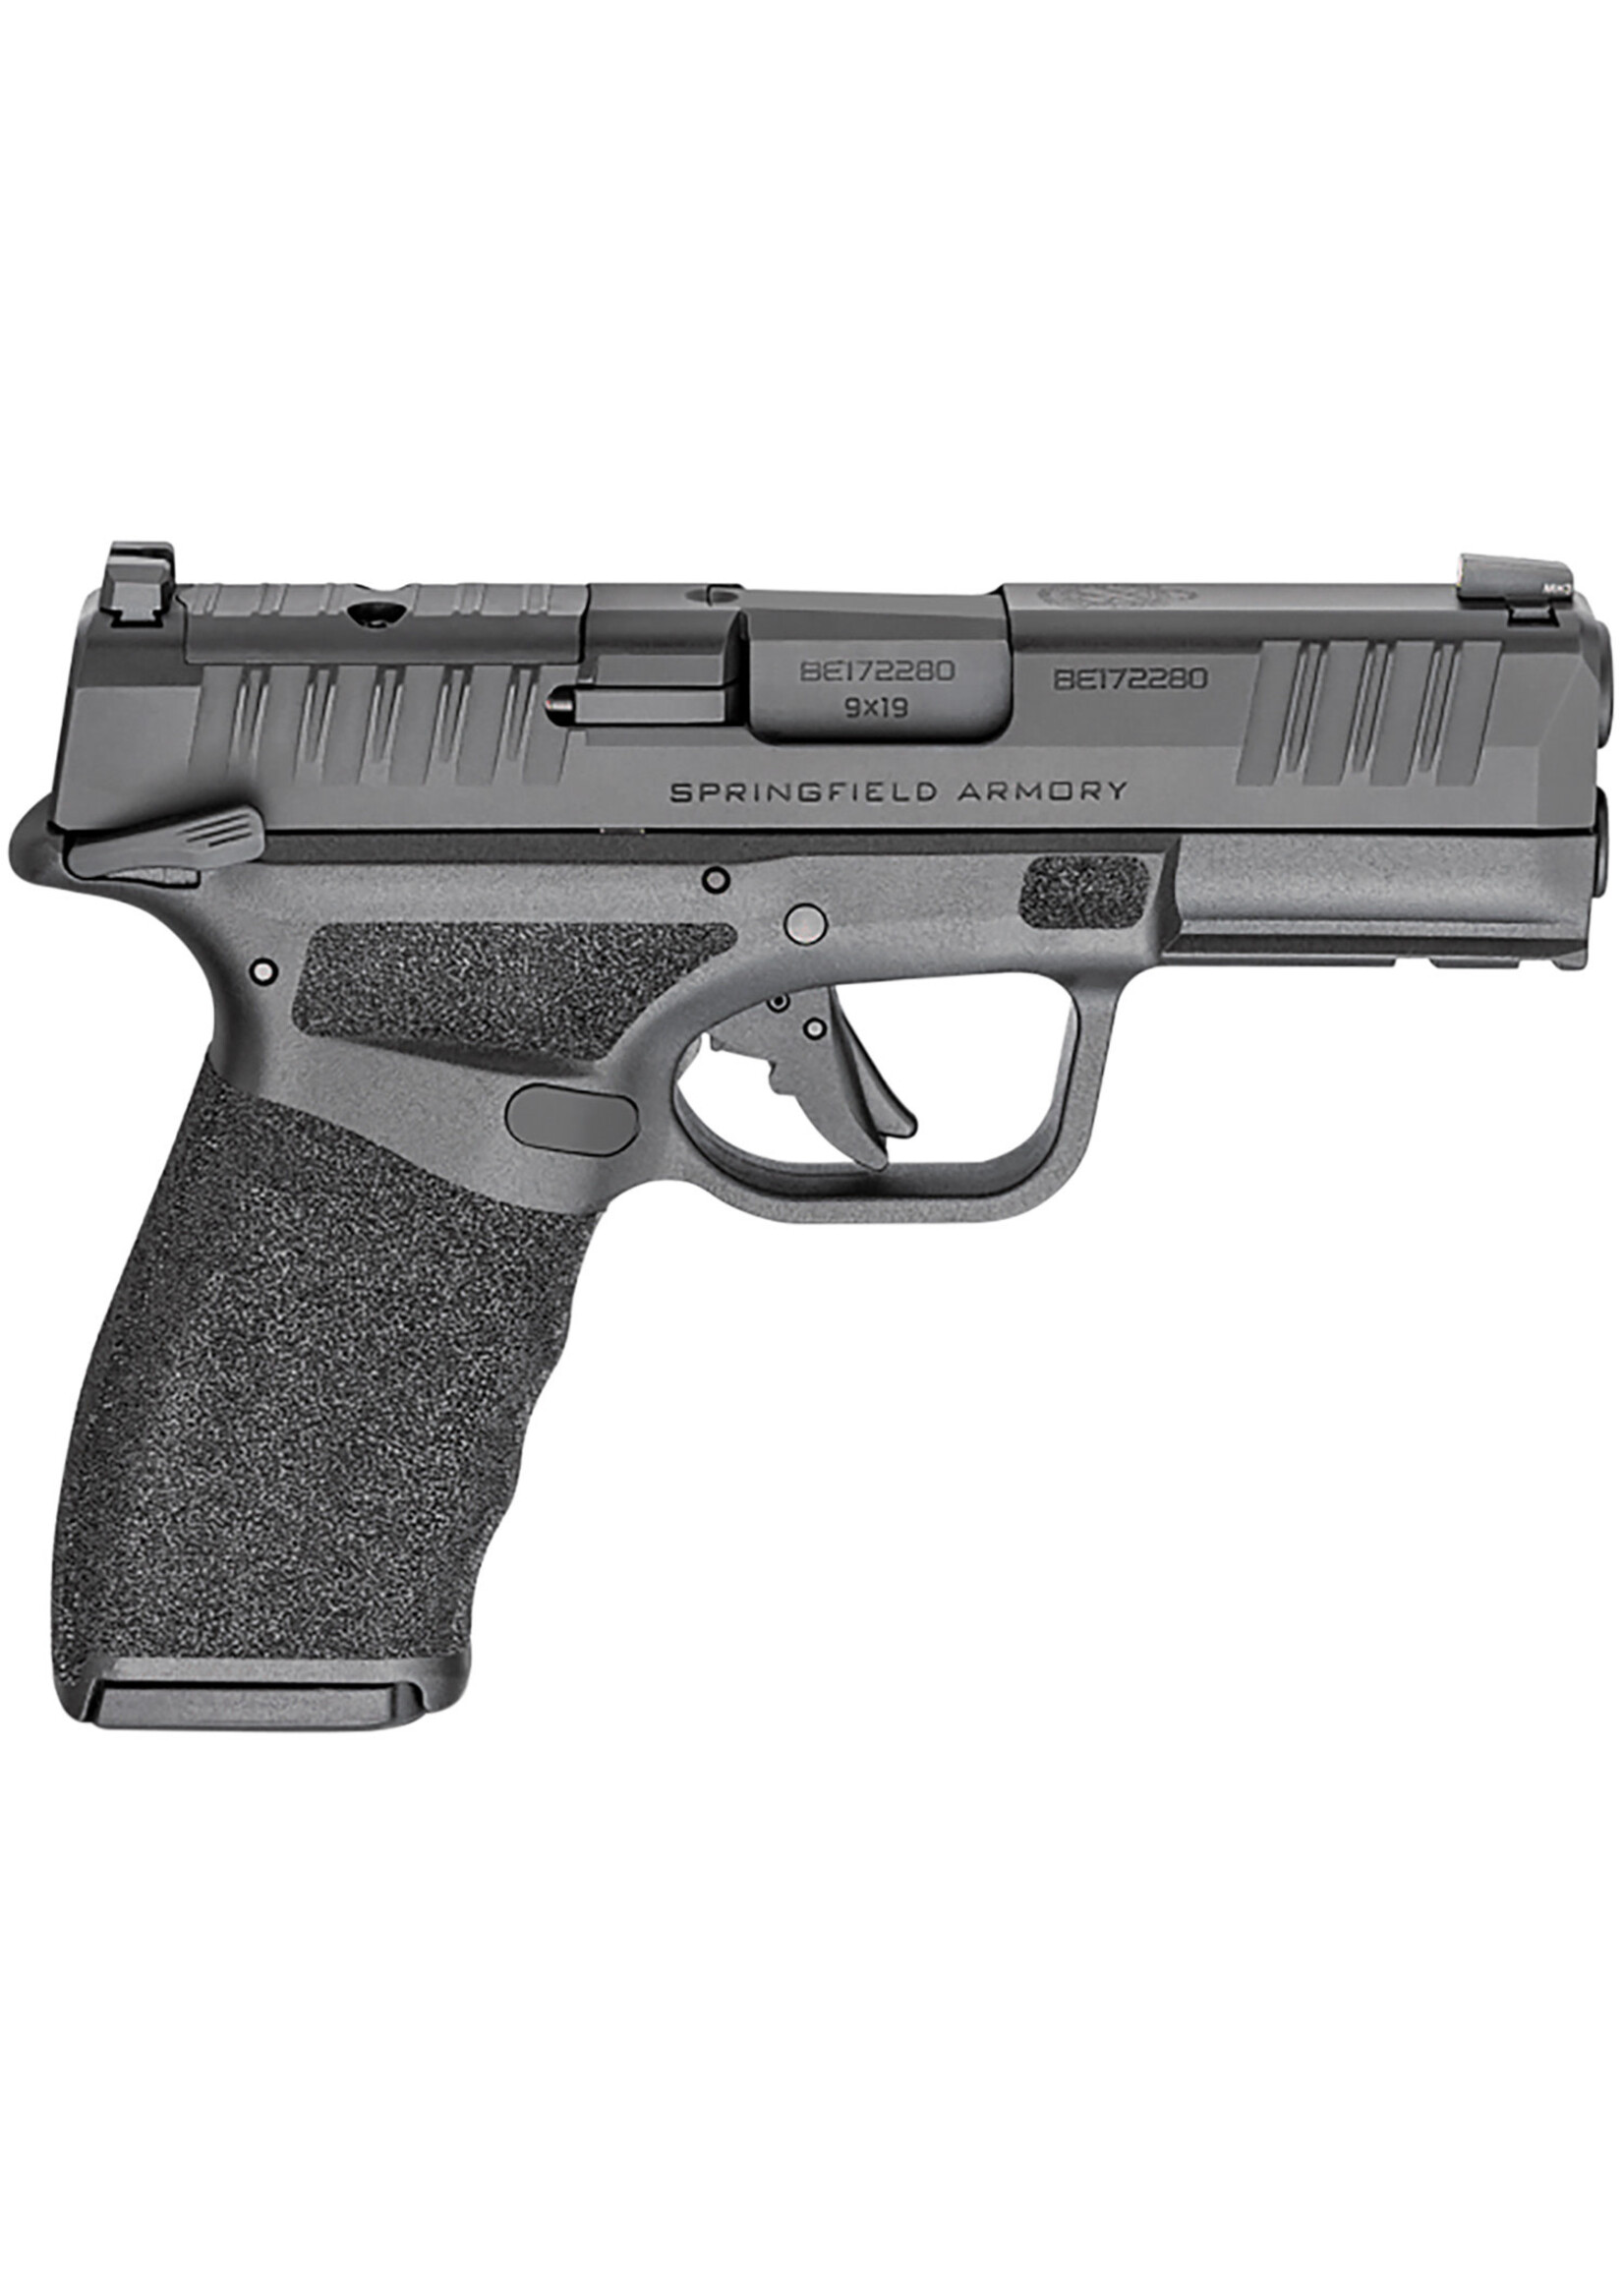 Springfield Armory Springfield Armory HCP9379BOSPMS Hellcat Pro OSP Compact 9mm Luger 15+1 3.70" Black Melonite Steel Barrel, Black Melonite Optic Ready/Serrated Slide, Black Polymer Frame w/Accessory Rail, Black Polymer w/Adaptive Texture Grips, Right Ha